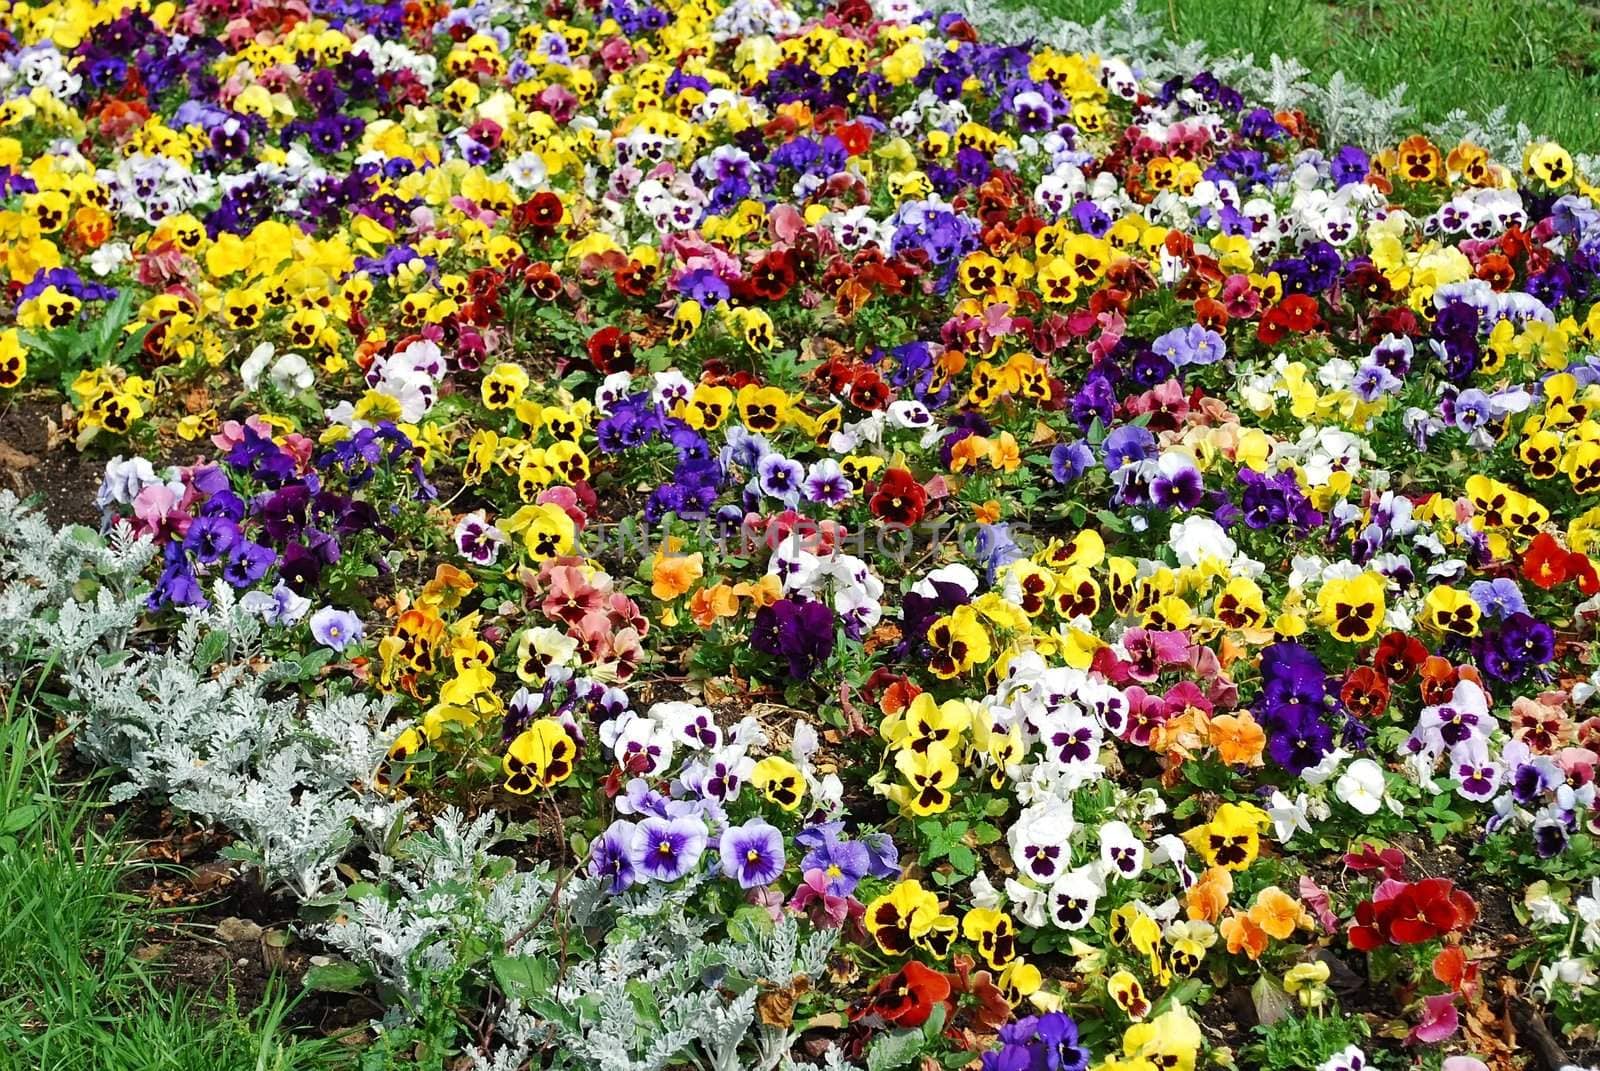 Flower bed with pansies